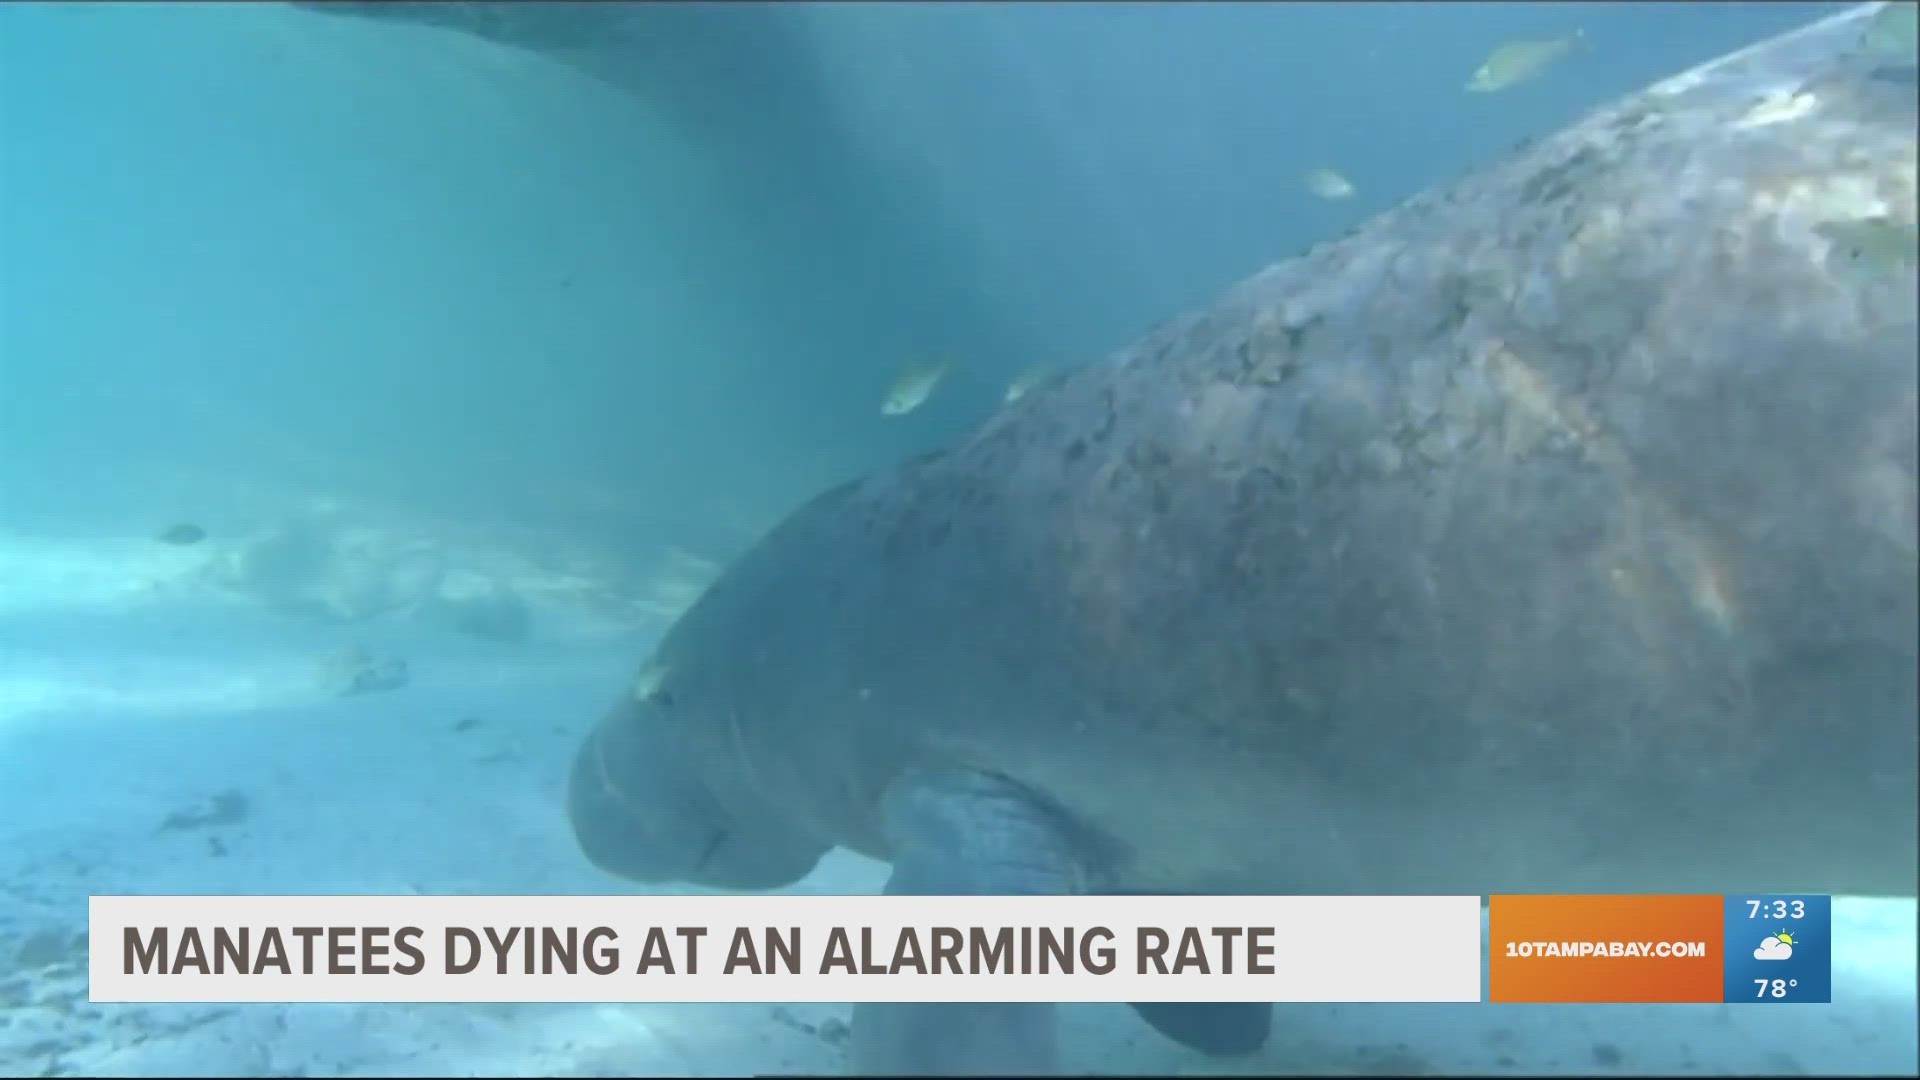 Officials say the manatees are starving to death.